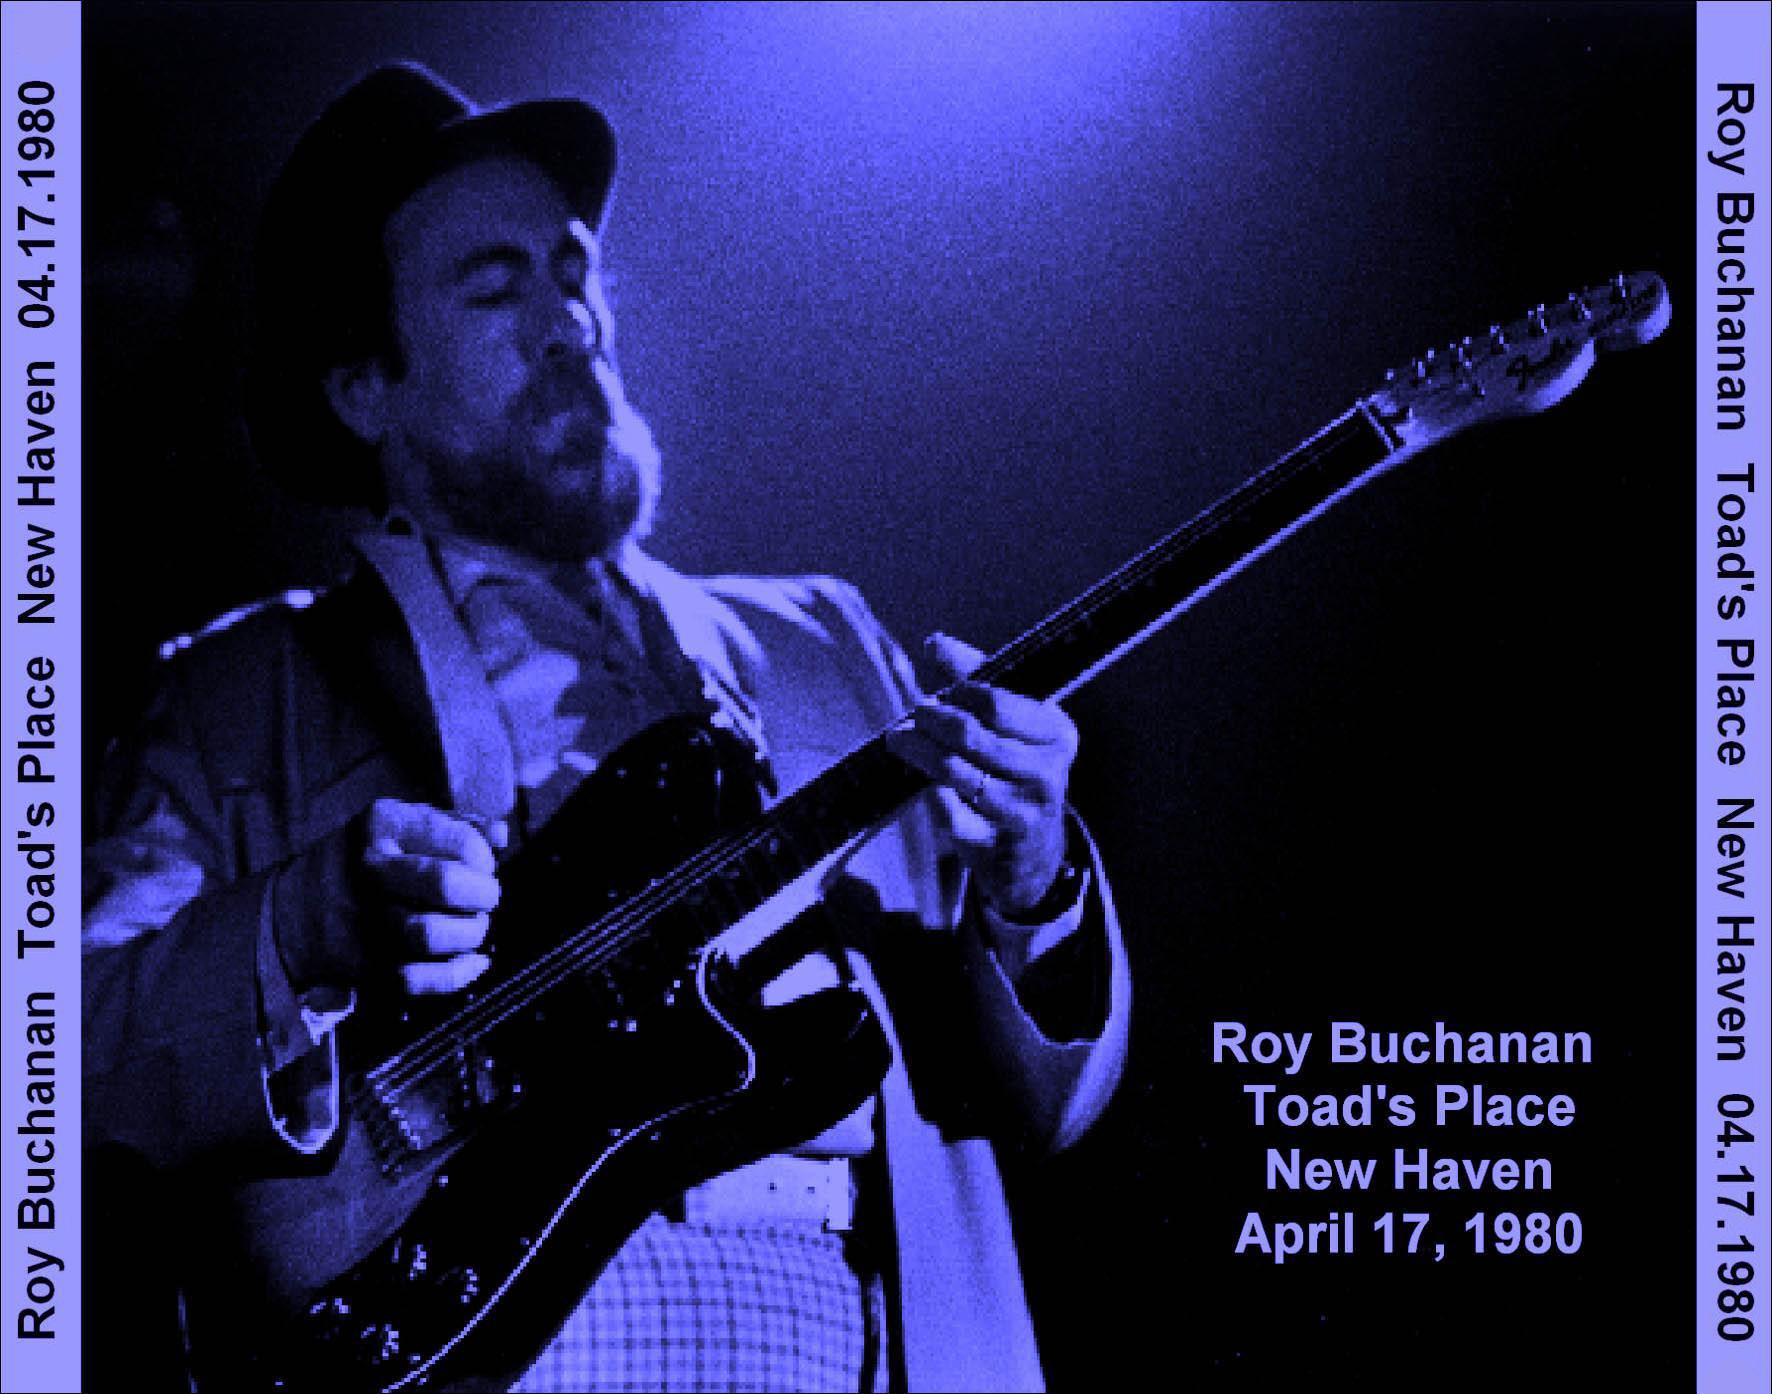 roy buchanan 1980 04 17 cdr toads placefront